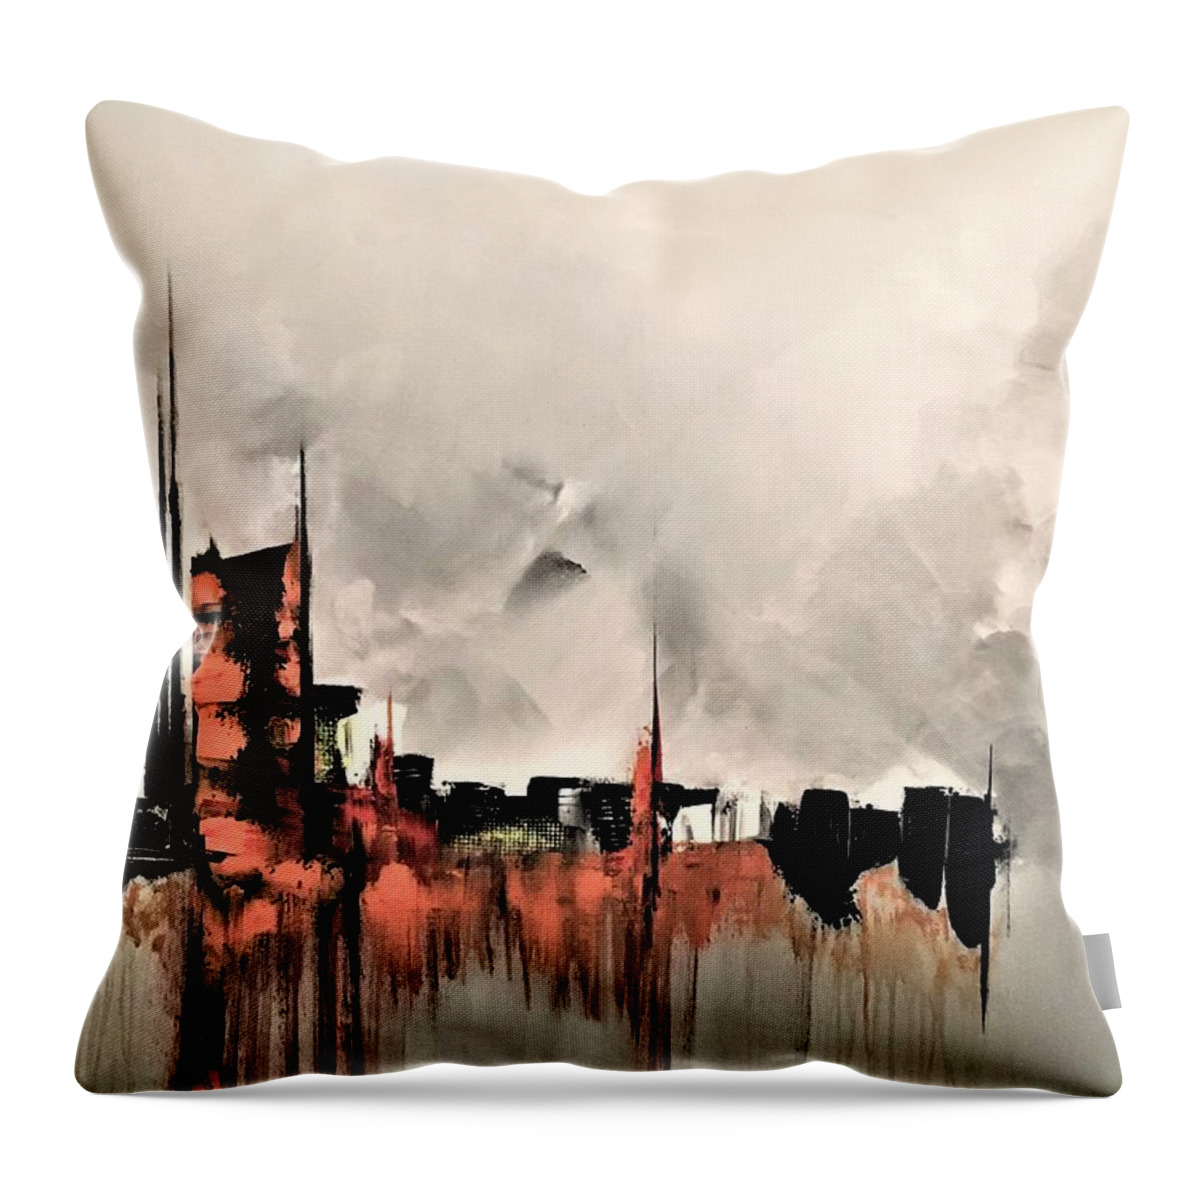 Abstract Throw Pillow featuring the painting Riveting by Soraya Silvestri